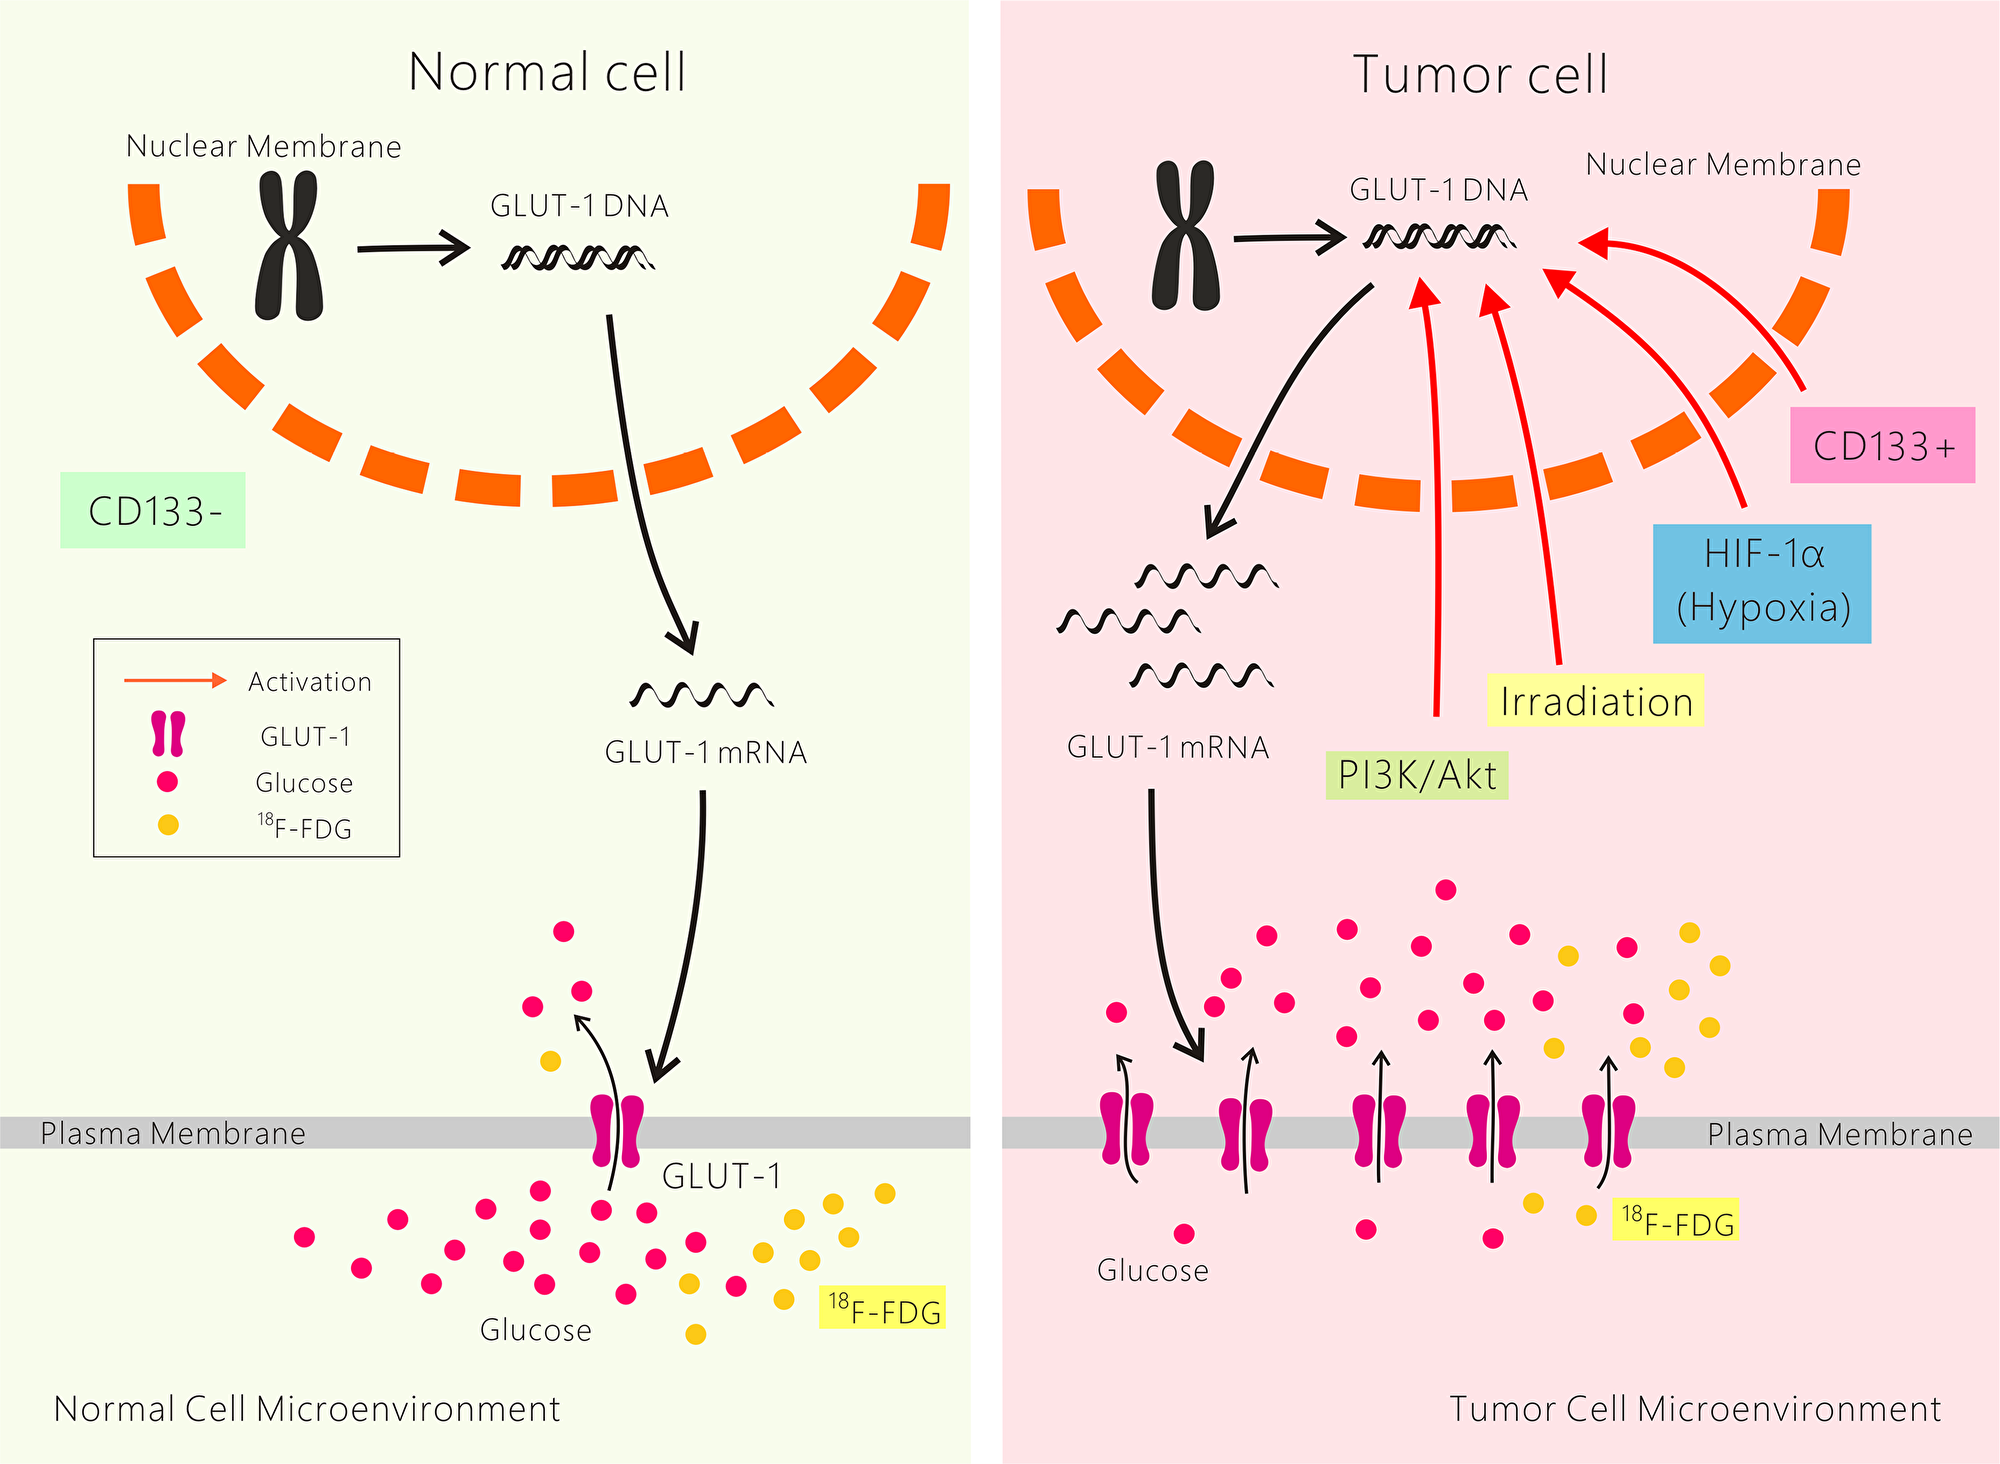 Possible mechanisms of resistance to cancer radiotherapy and chemotherapy mediated by GLUT-1.